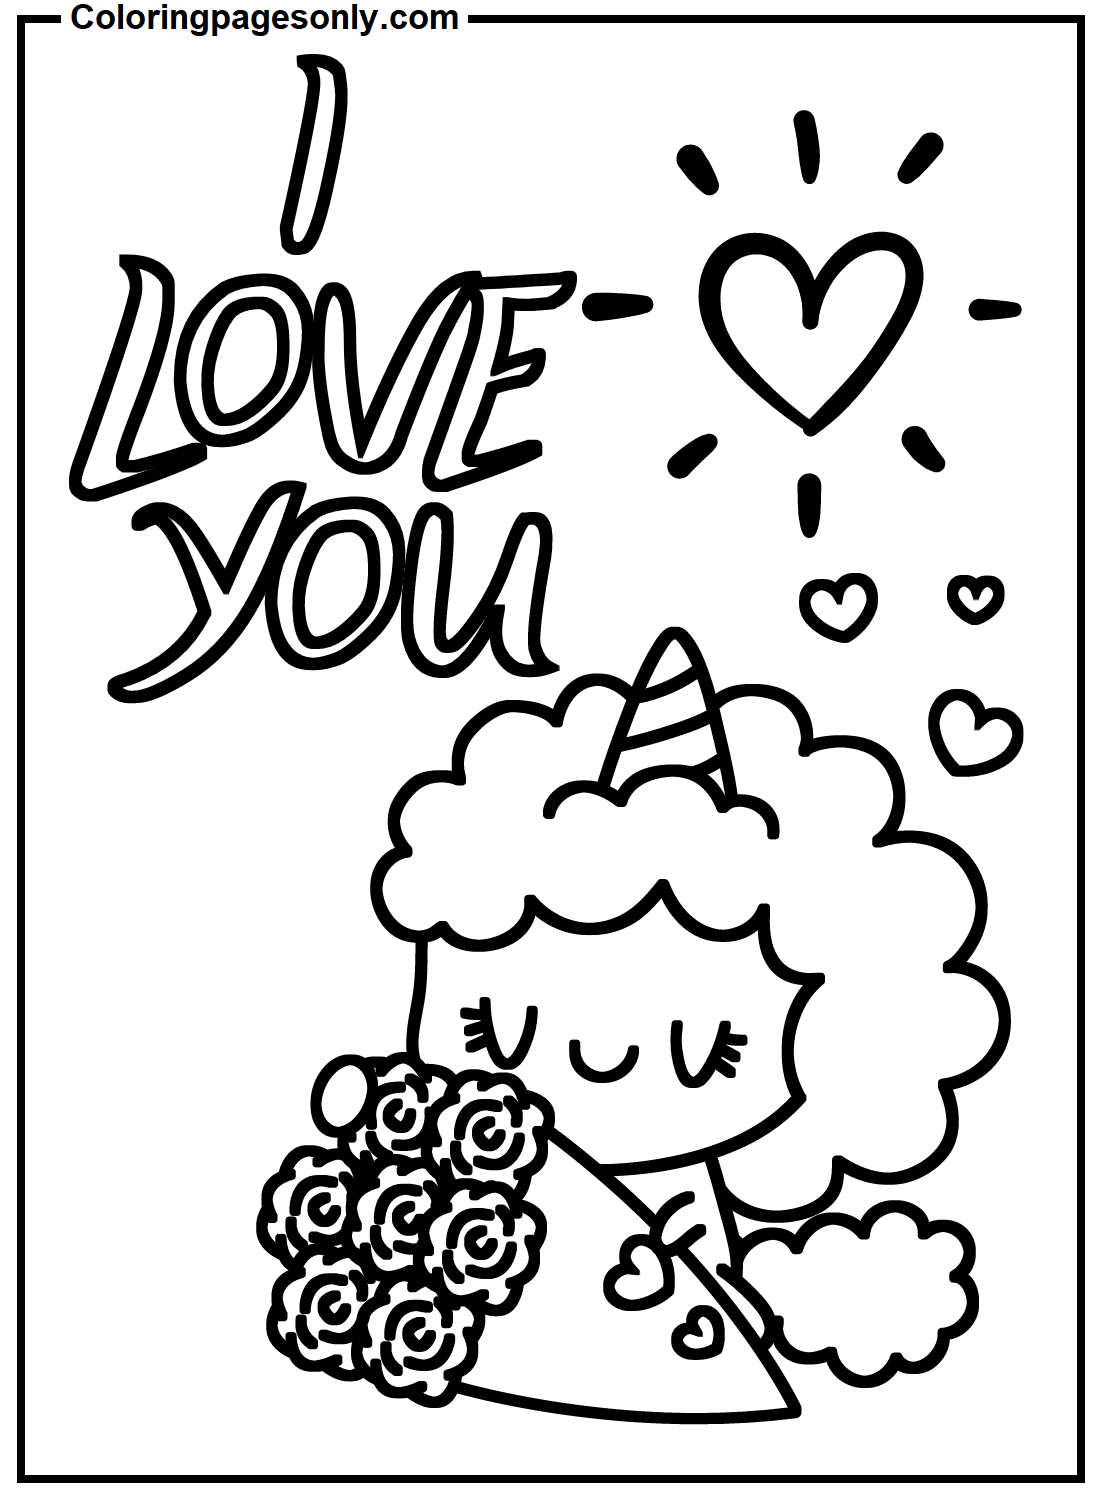 Unicorn Valentine’s Day Coloring Page